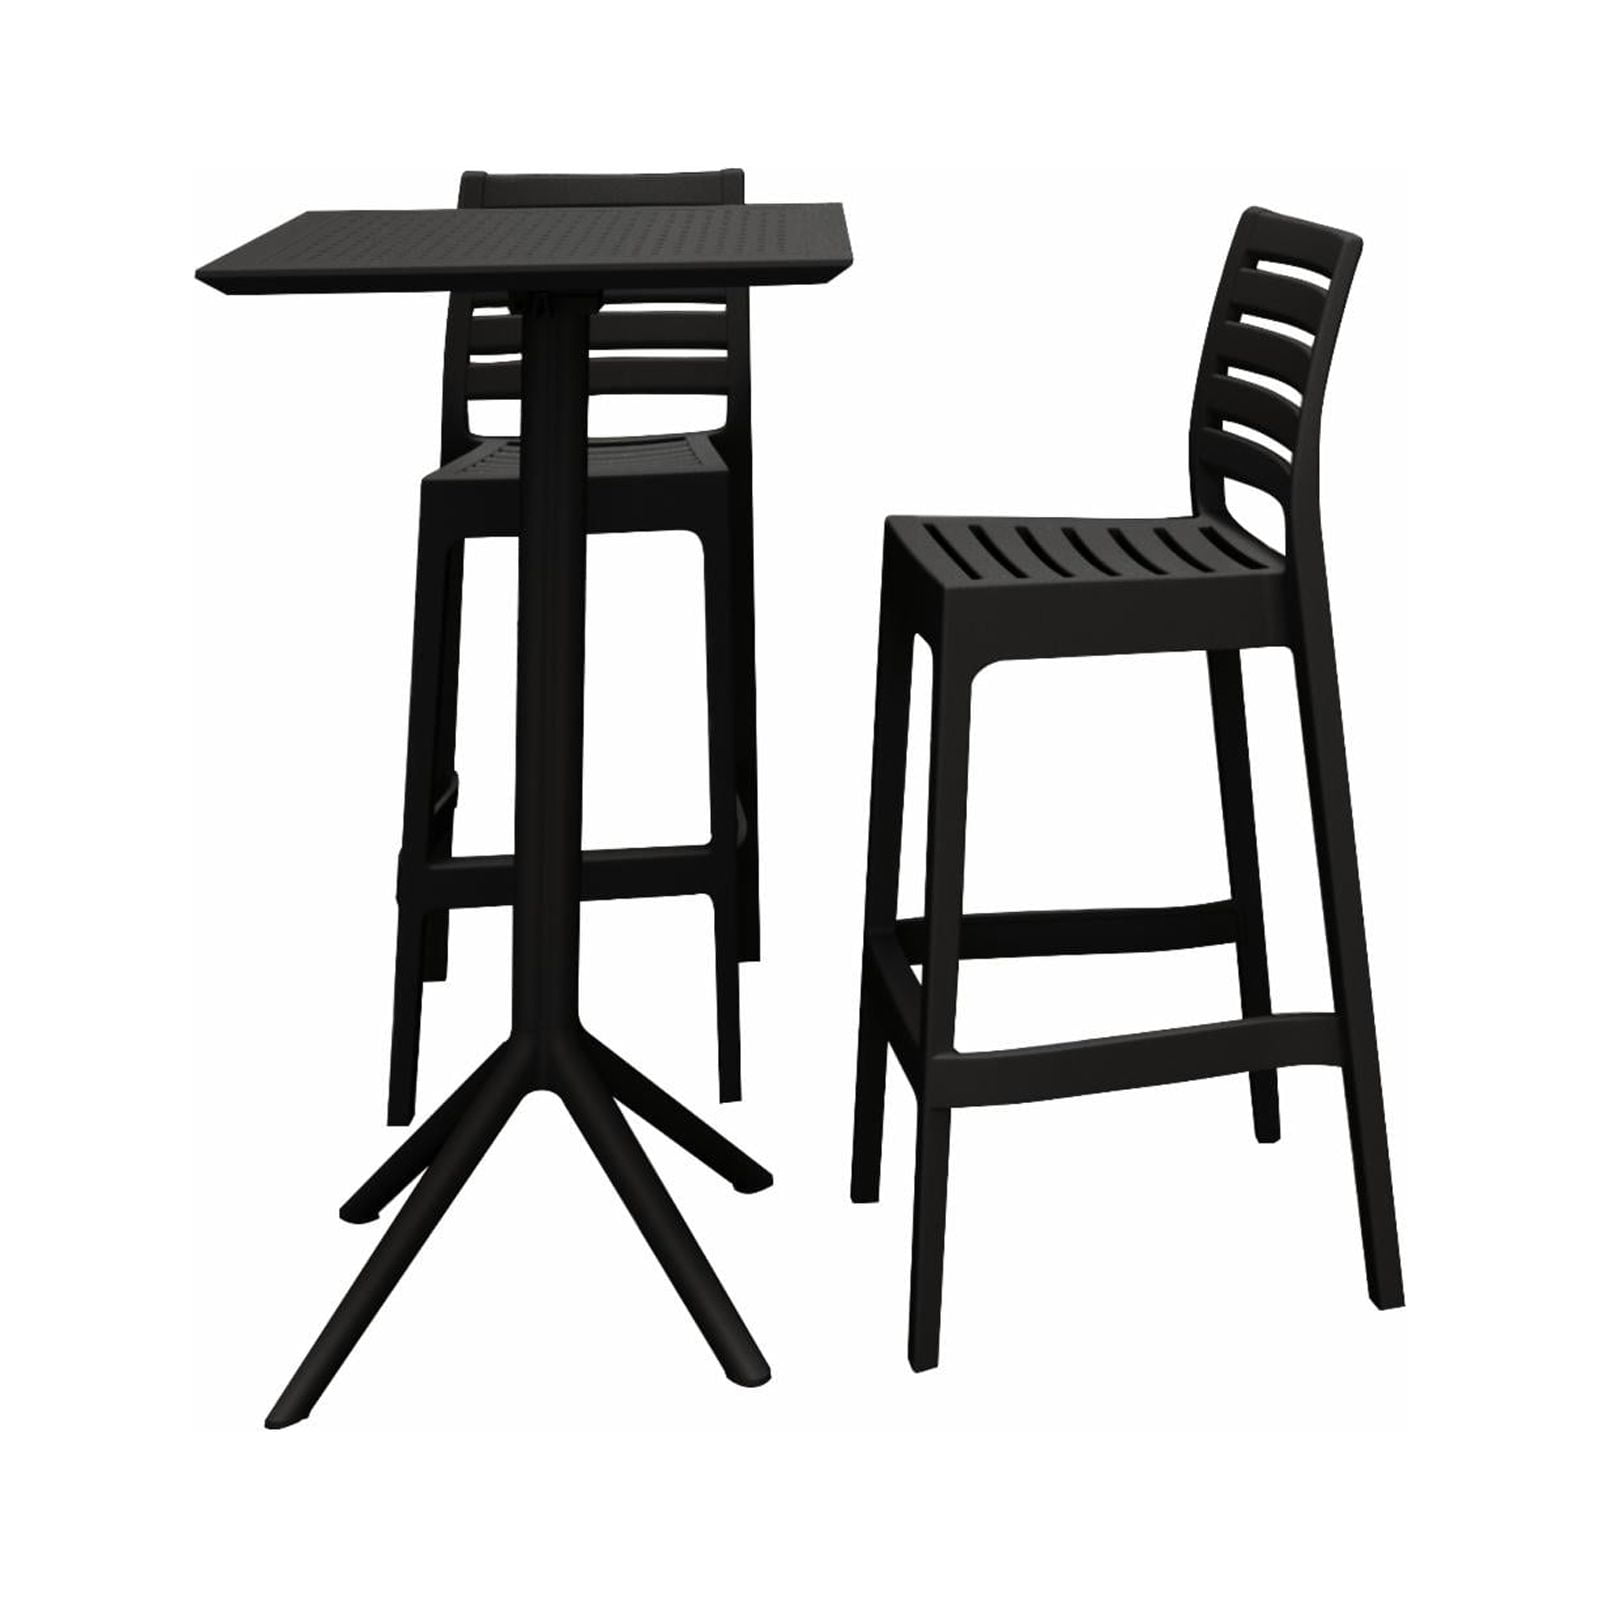 Isp1161s-bla Sky Ares Square Bar Set With 2 Barstools, Black